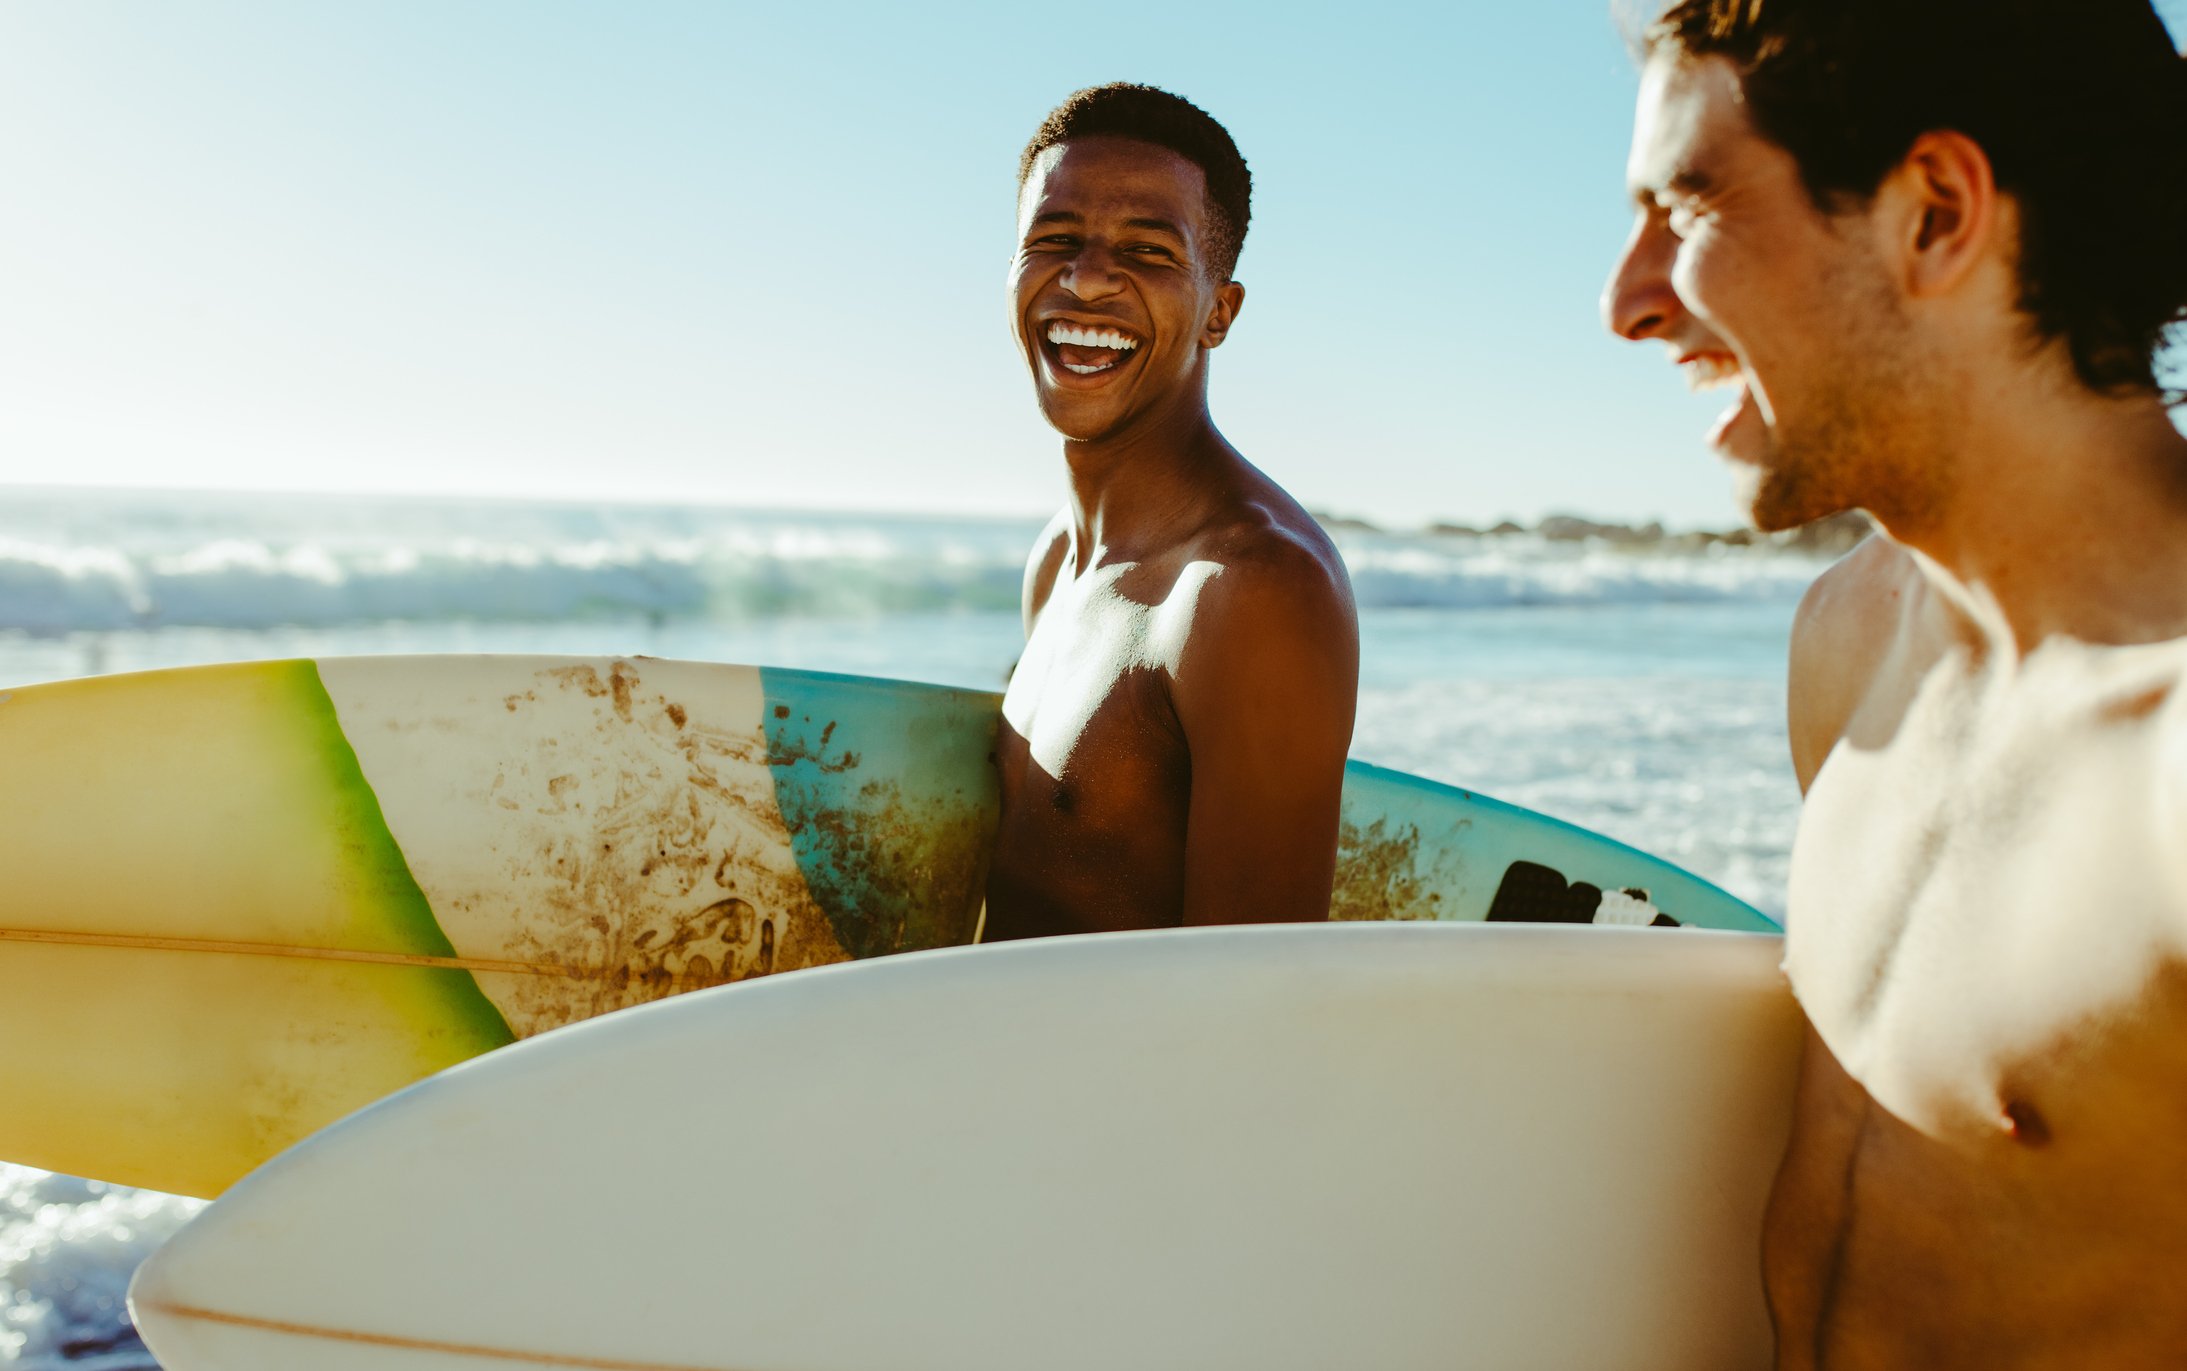 Two happy men with properly proected skin and hair go surfing